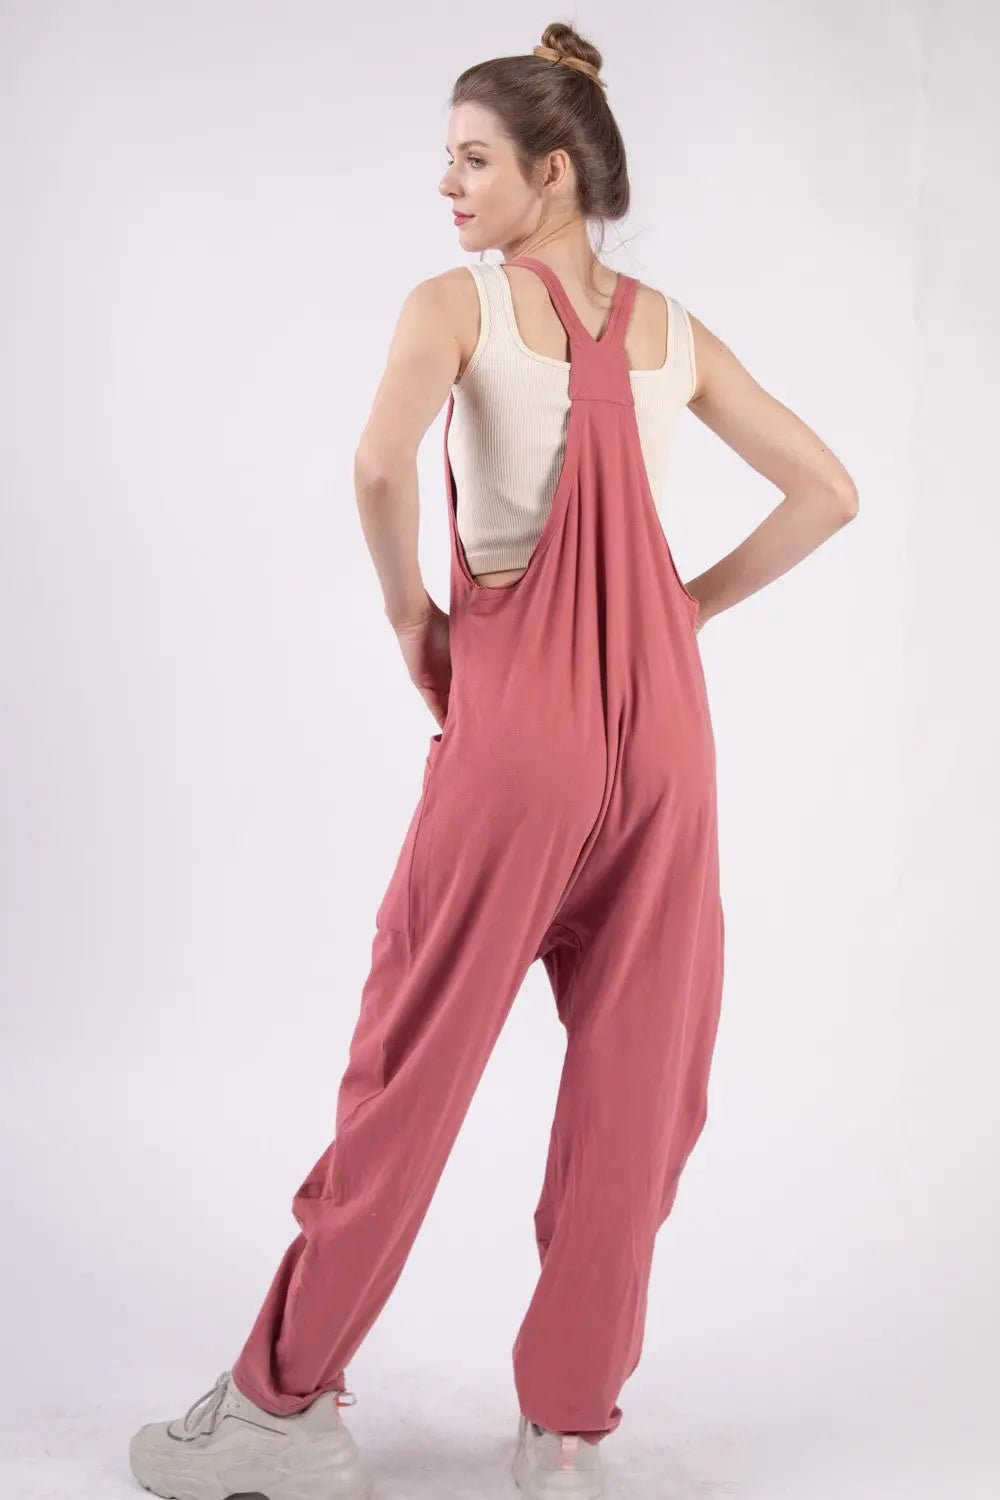 PLUNGING NECKLINE CASUAL ONE-PIECE OUTFIT SLEEVELESS JUMPSUIT WITH POCKETS - MeadeuxPLUNGING NECKLINE CASUAL ONE-PIECE OUTFIT SLEEVELESS JUMPSUIT WITH POCKETSJumpsuitMeadeux